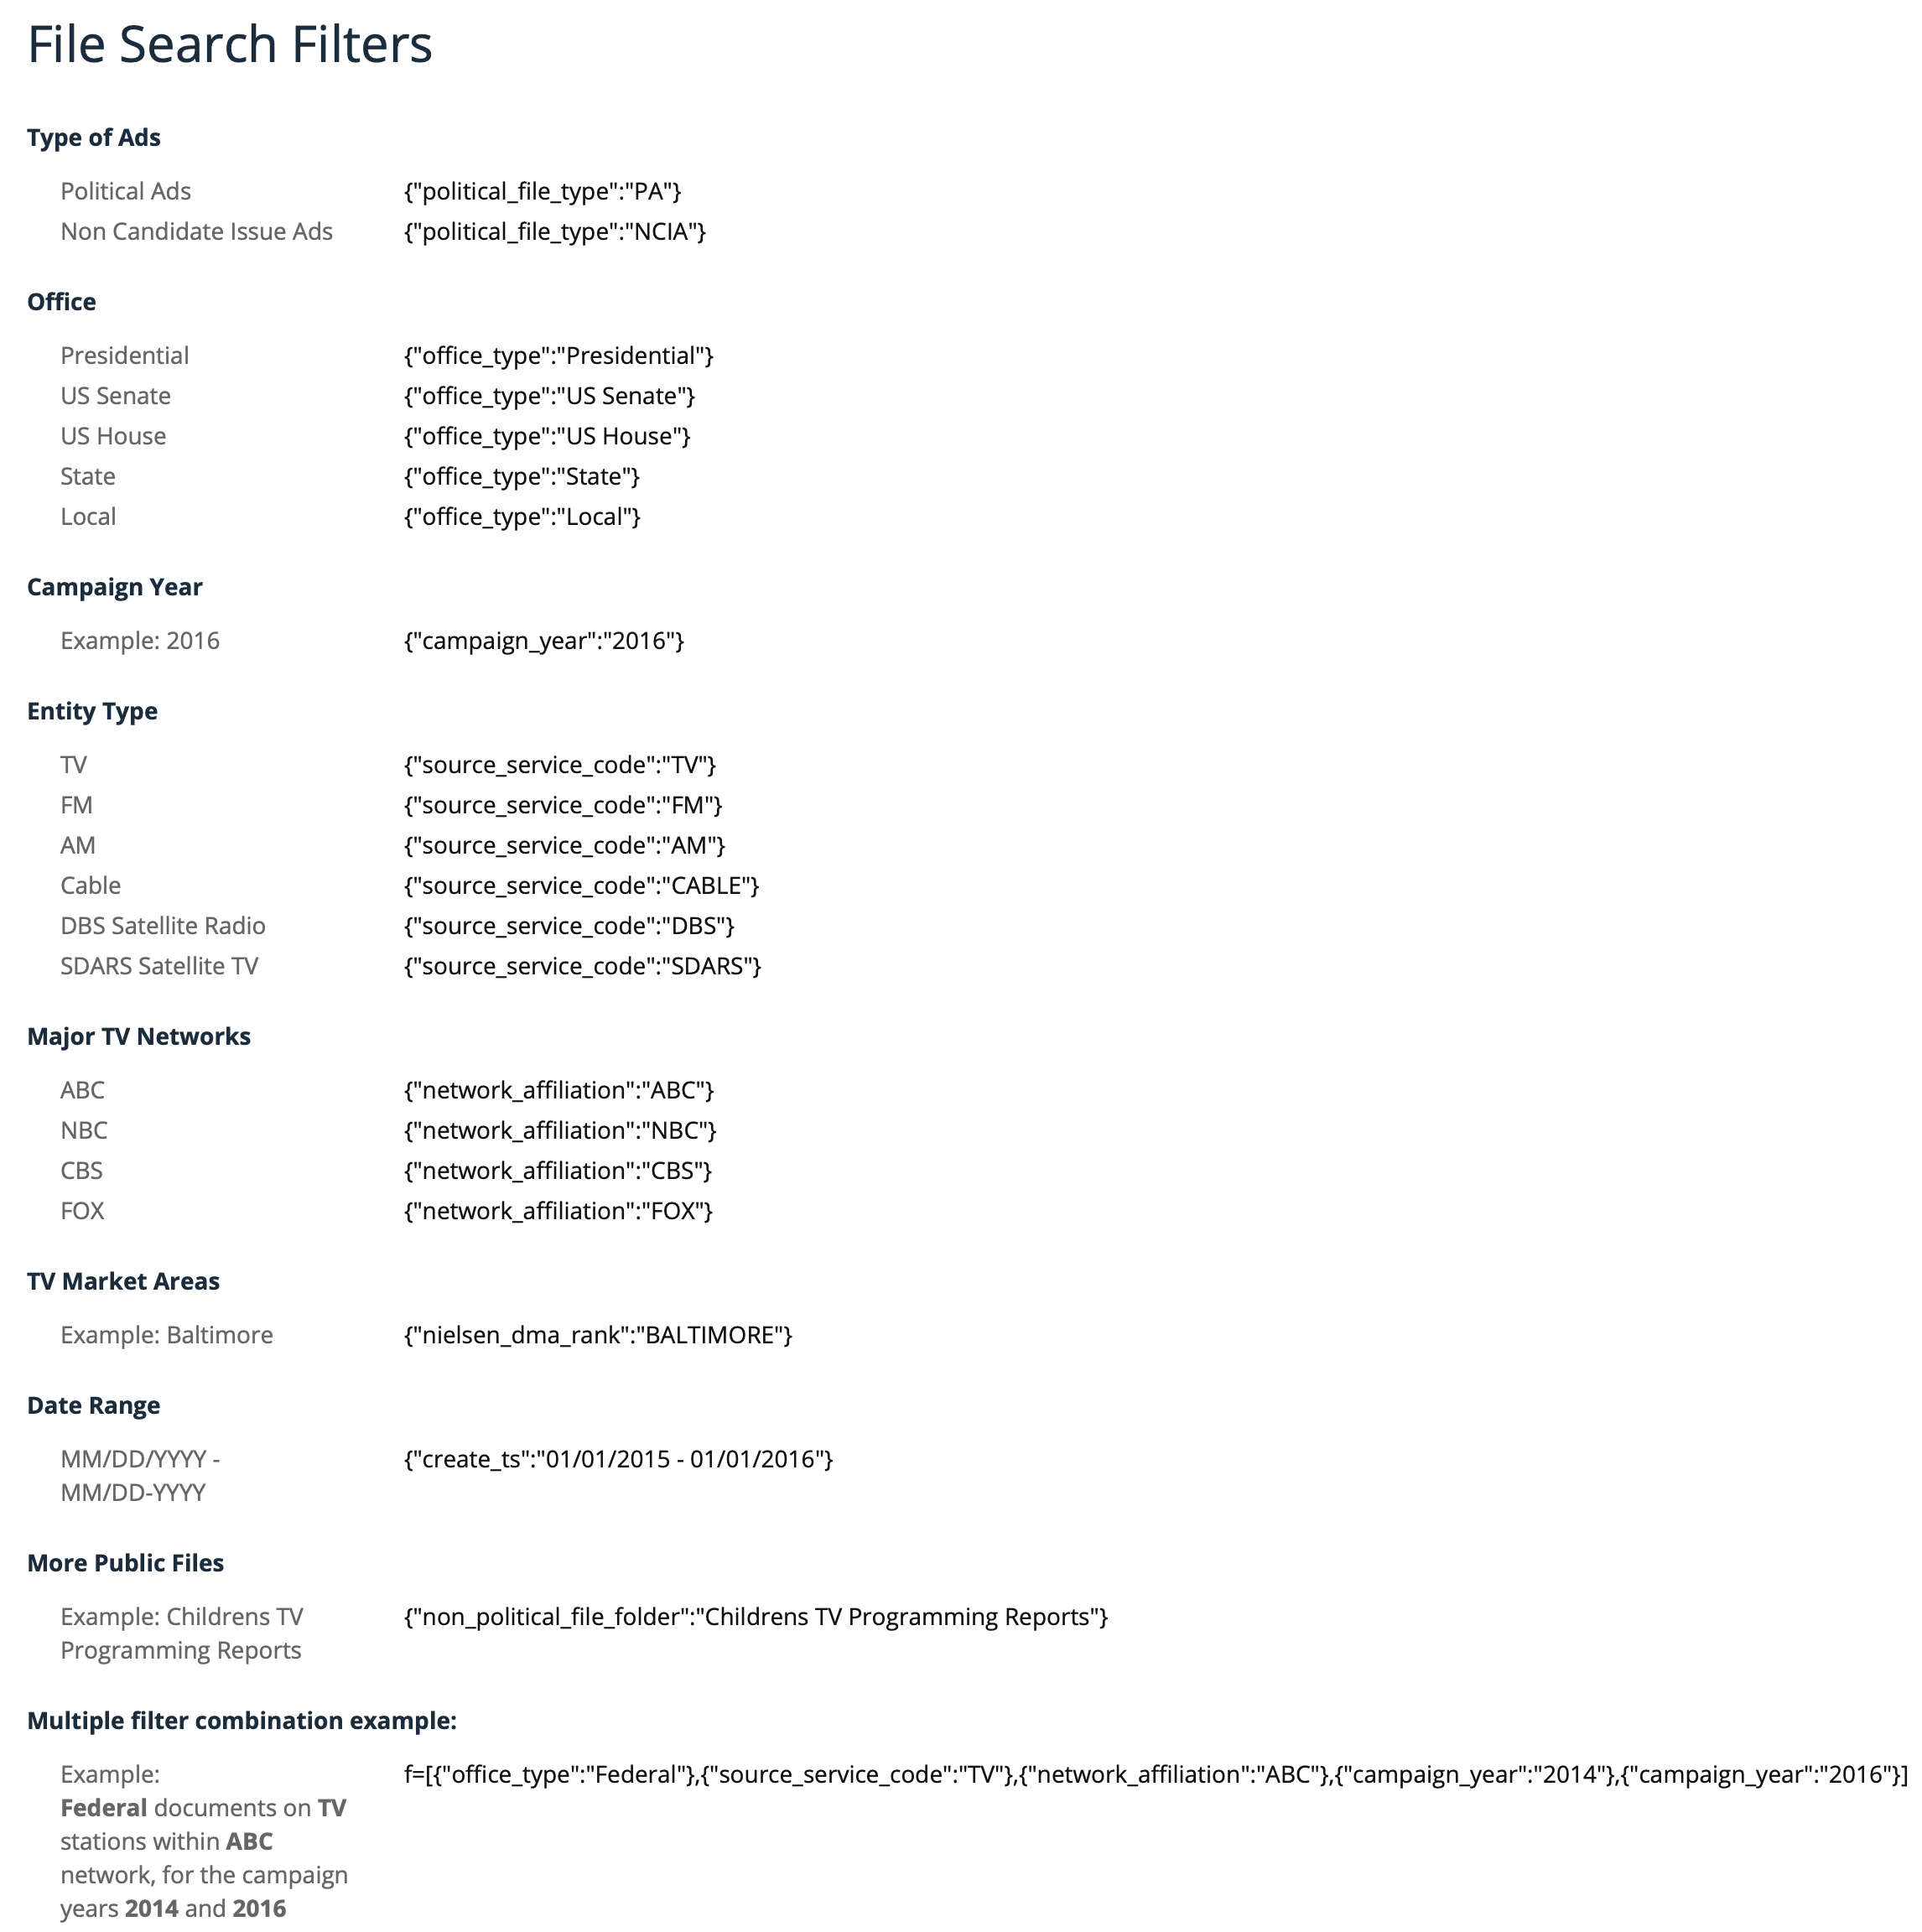 FCC OPIF file search filters